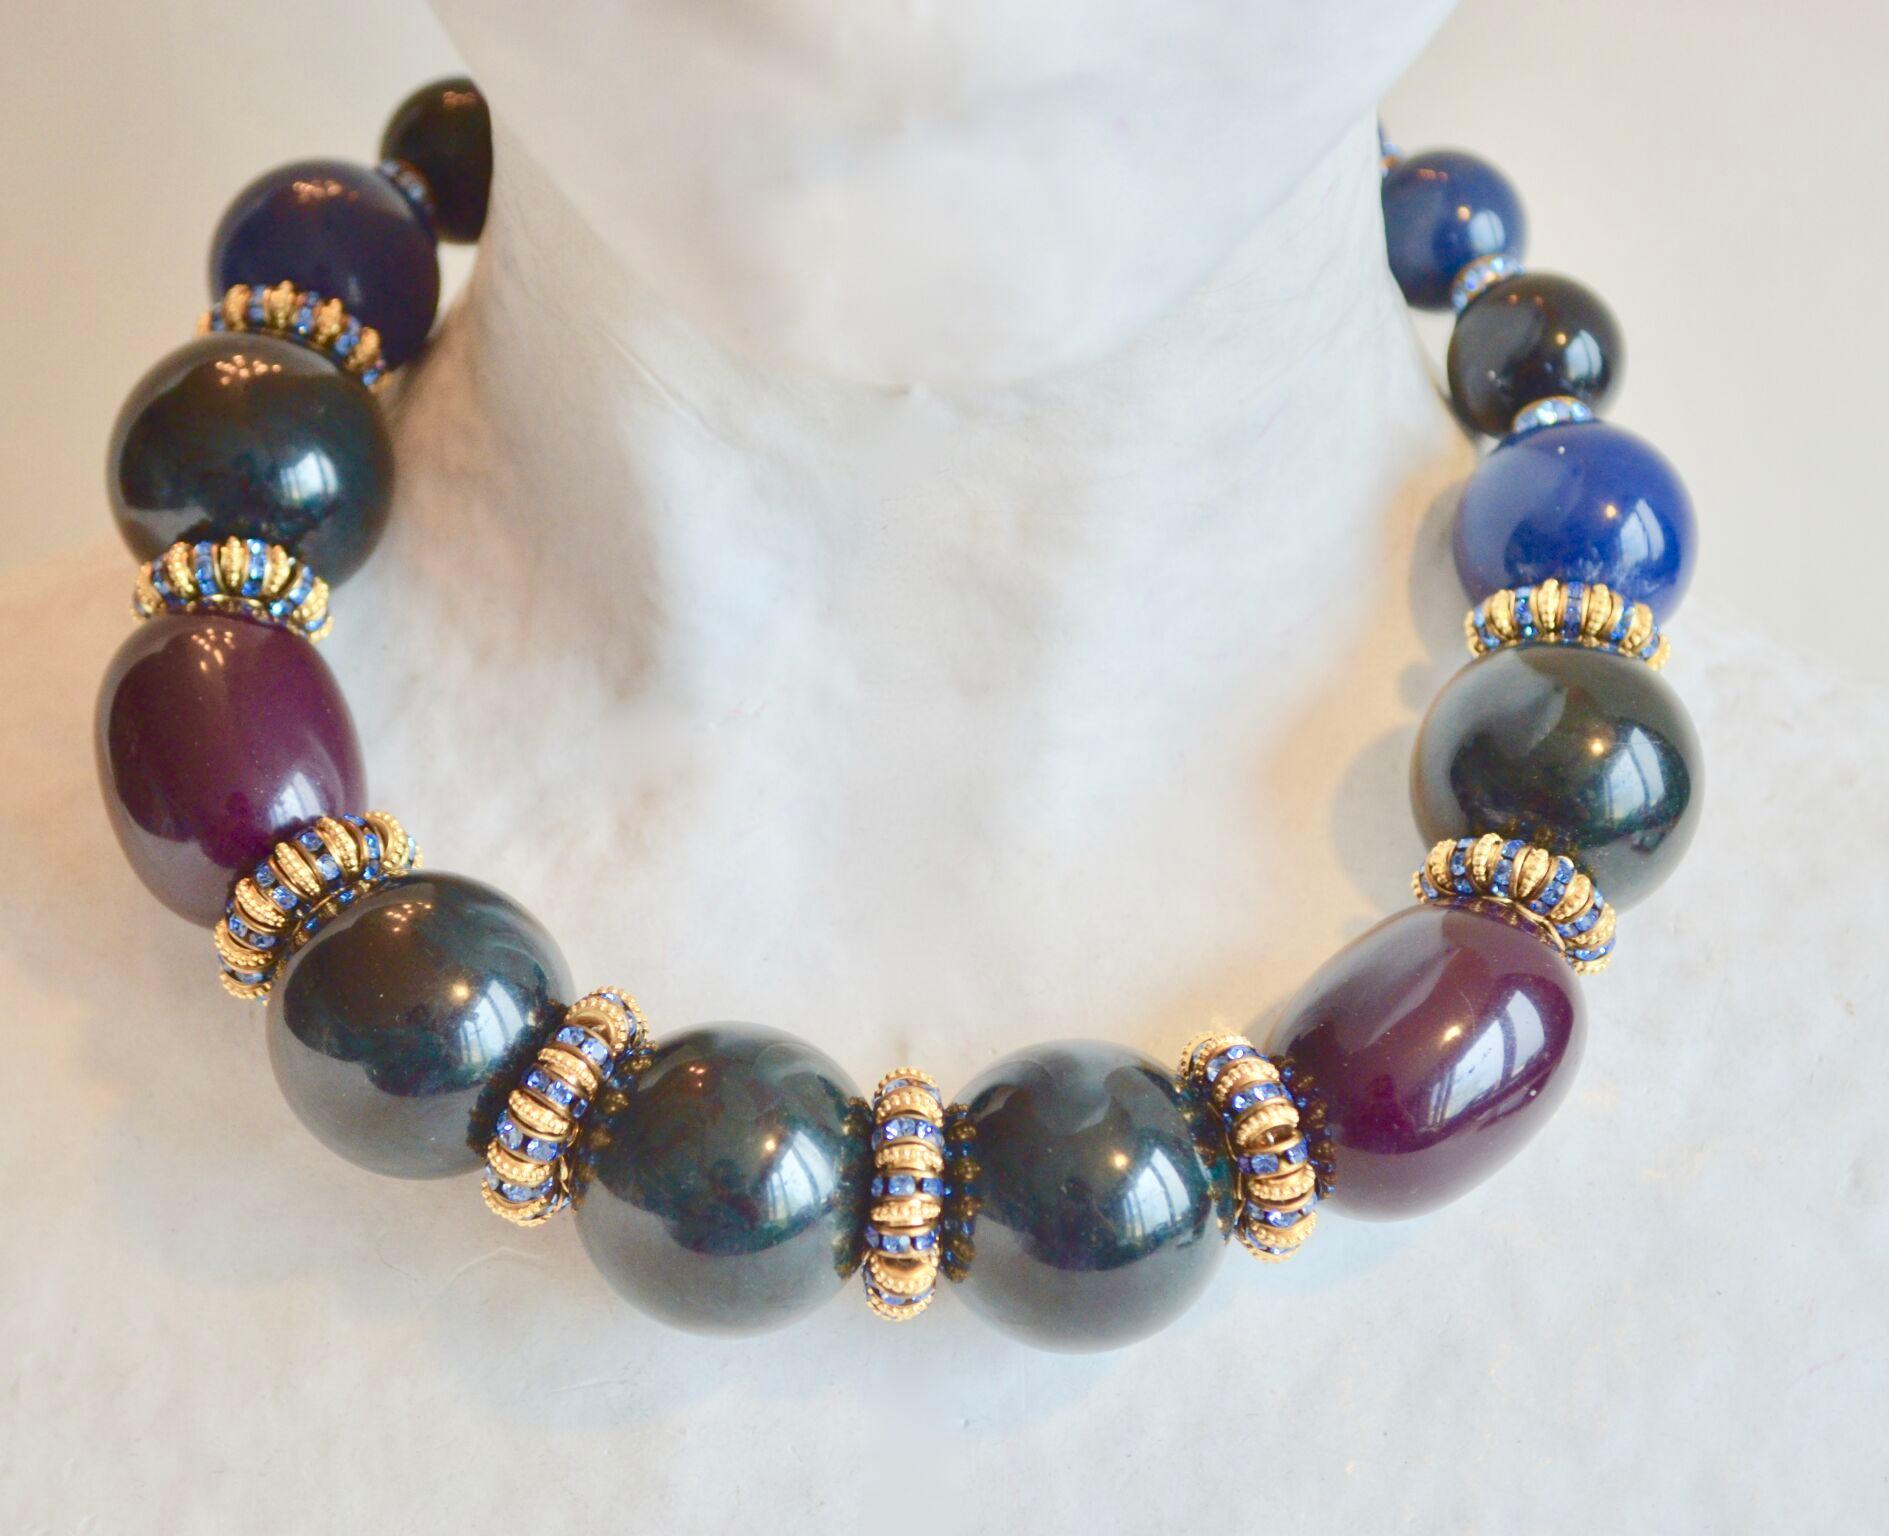 Gorgeous glass bead necklace in blue, green, and burgundy with interspersed Swarovski crystal rondelles from Francoise Montague. 